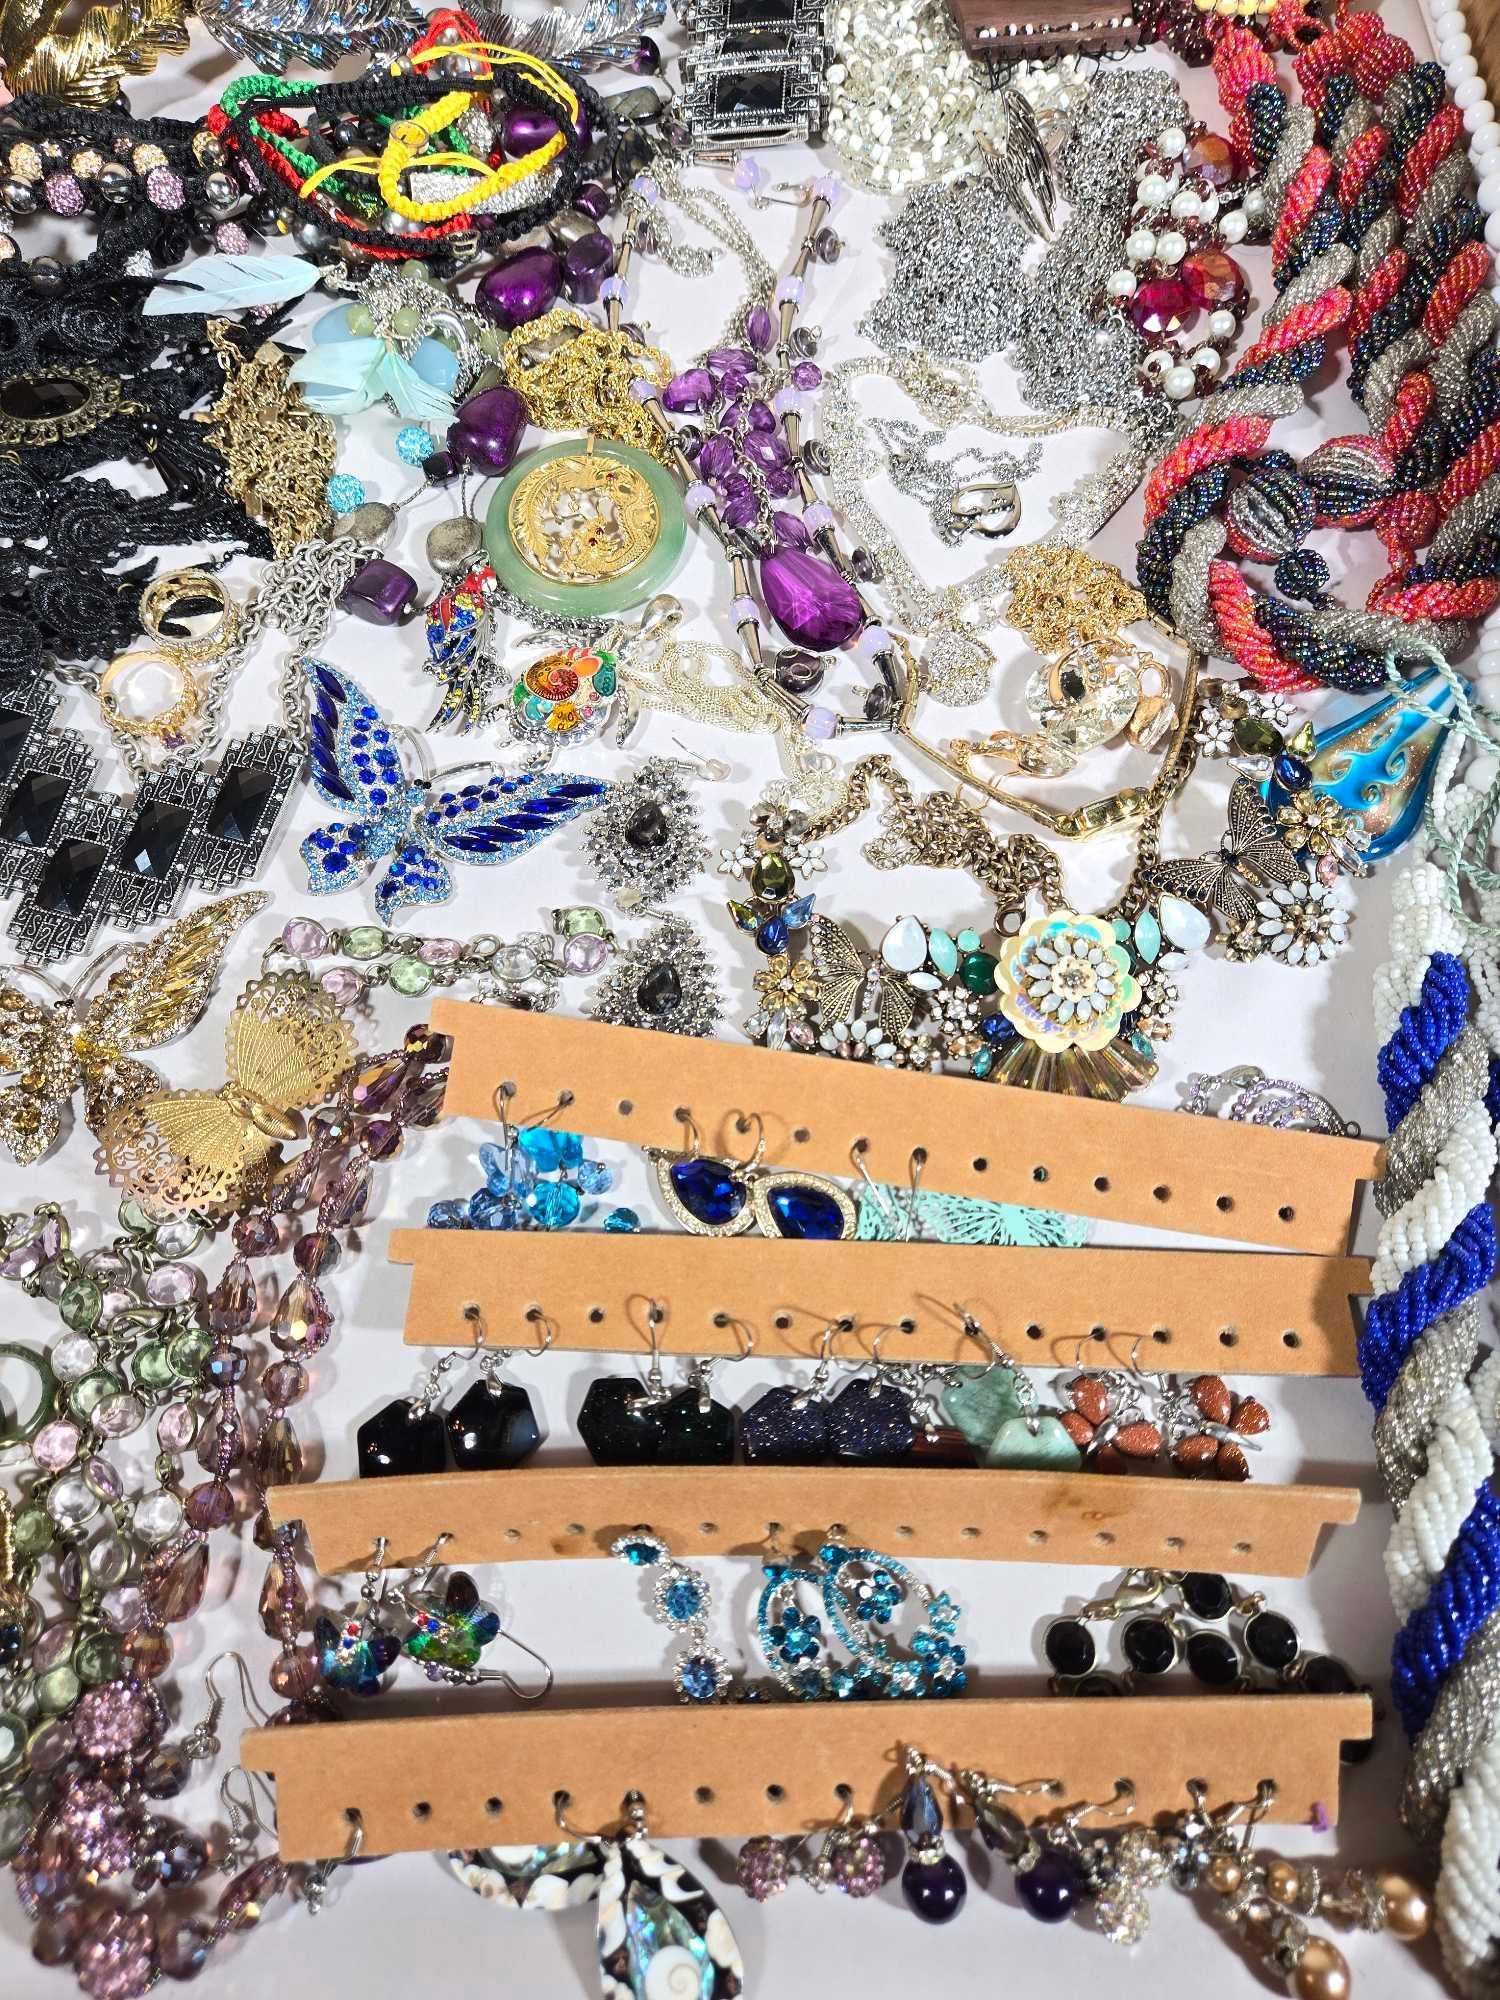 Full Tray of Contemporary Costume Jewelry